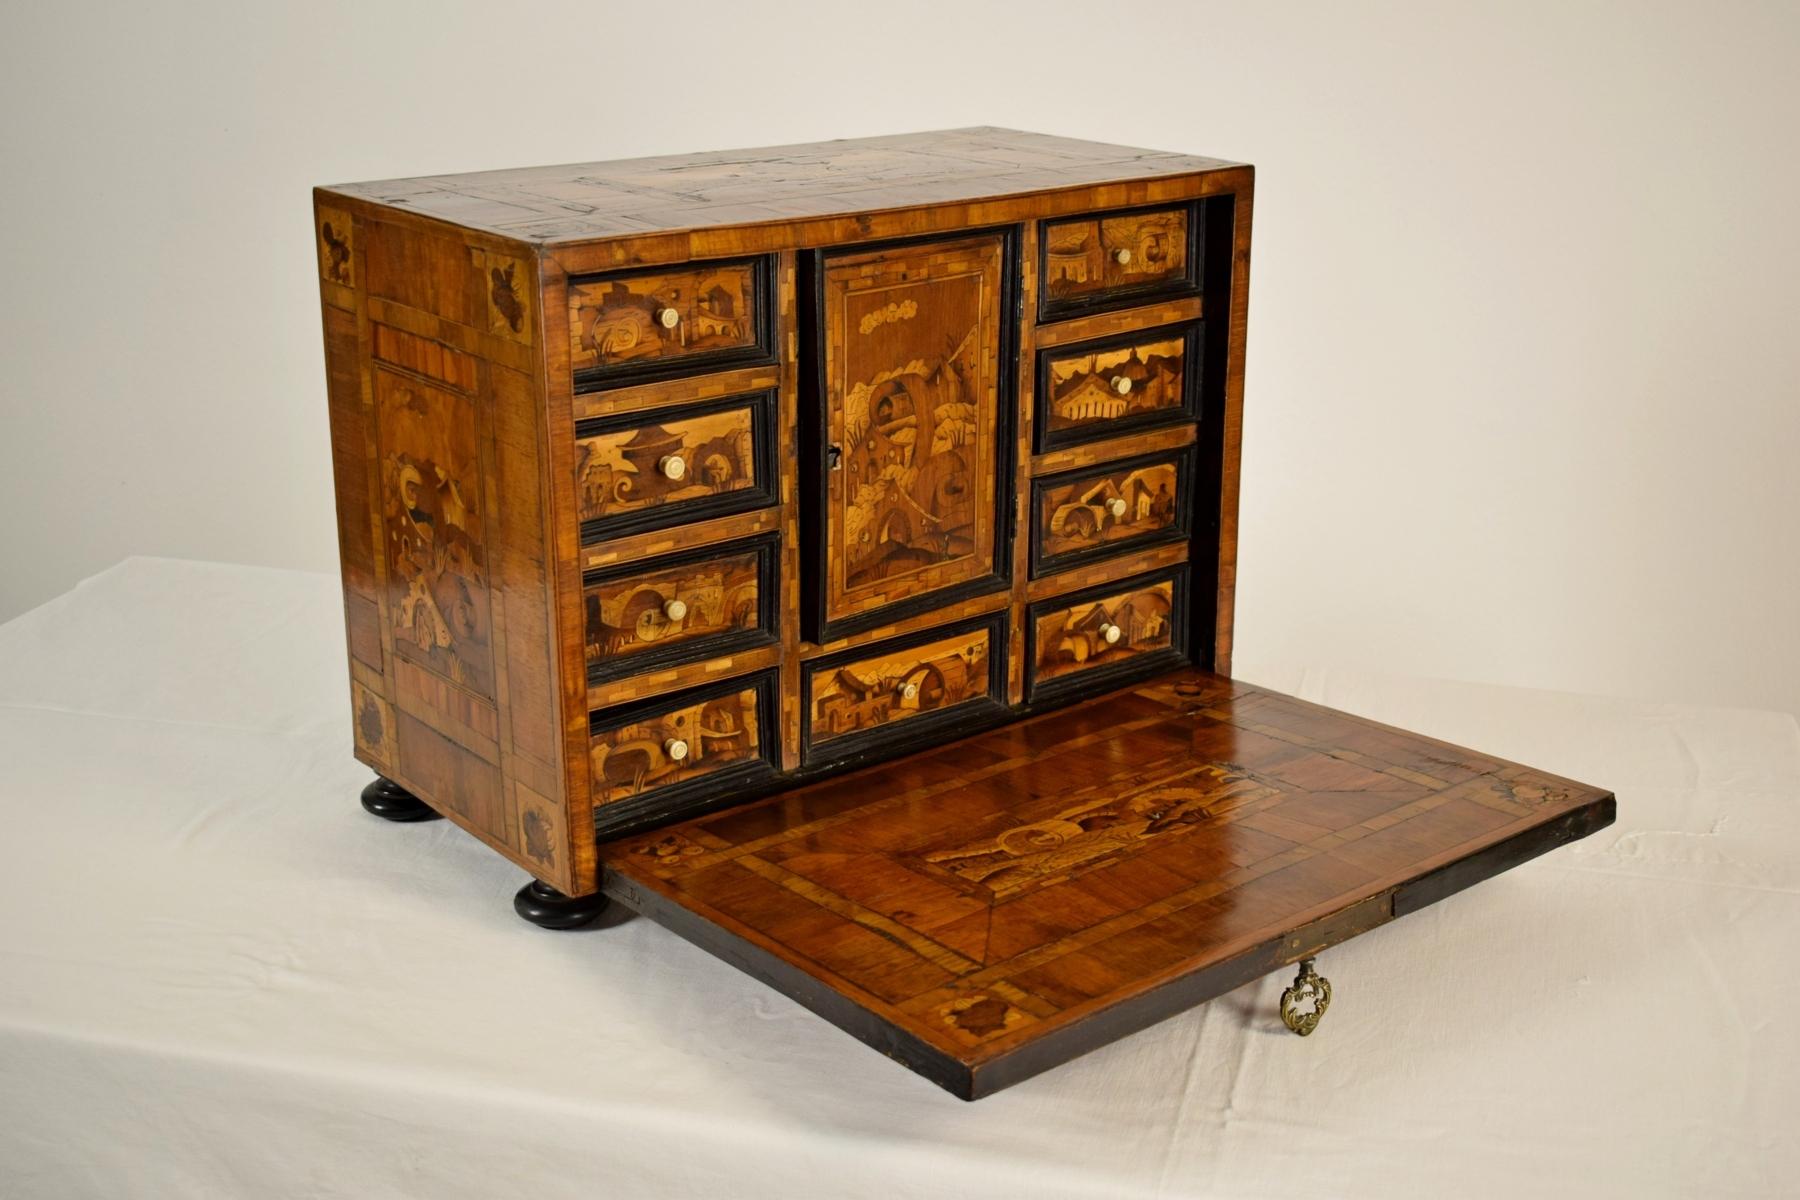 17th century, German wood apothecary cabinet with fantasy architectures

This small apothecary cabinet was made in the 17th century in Germany, in wood finely decorated with inlays depicting architectural patterns of fantasy, obtained with the